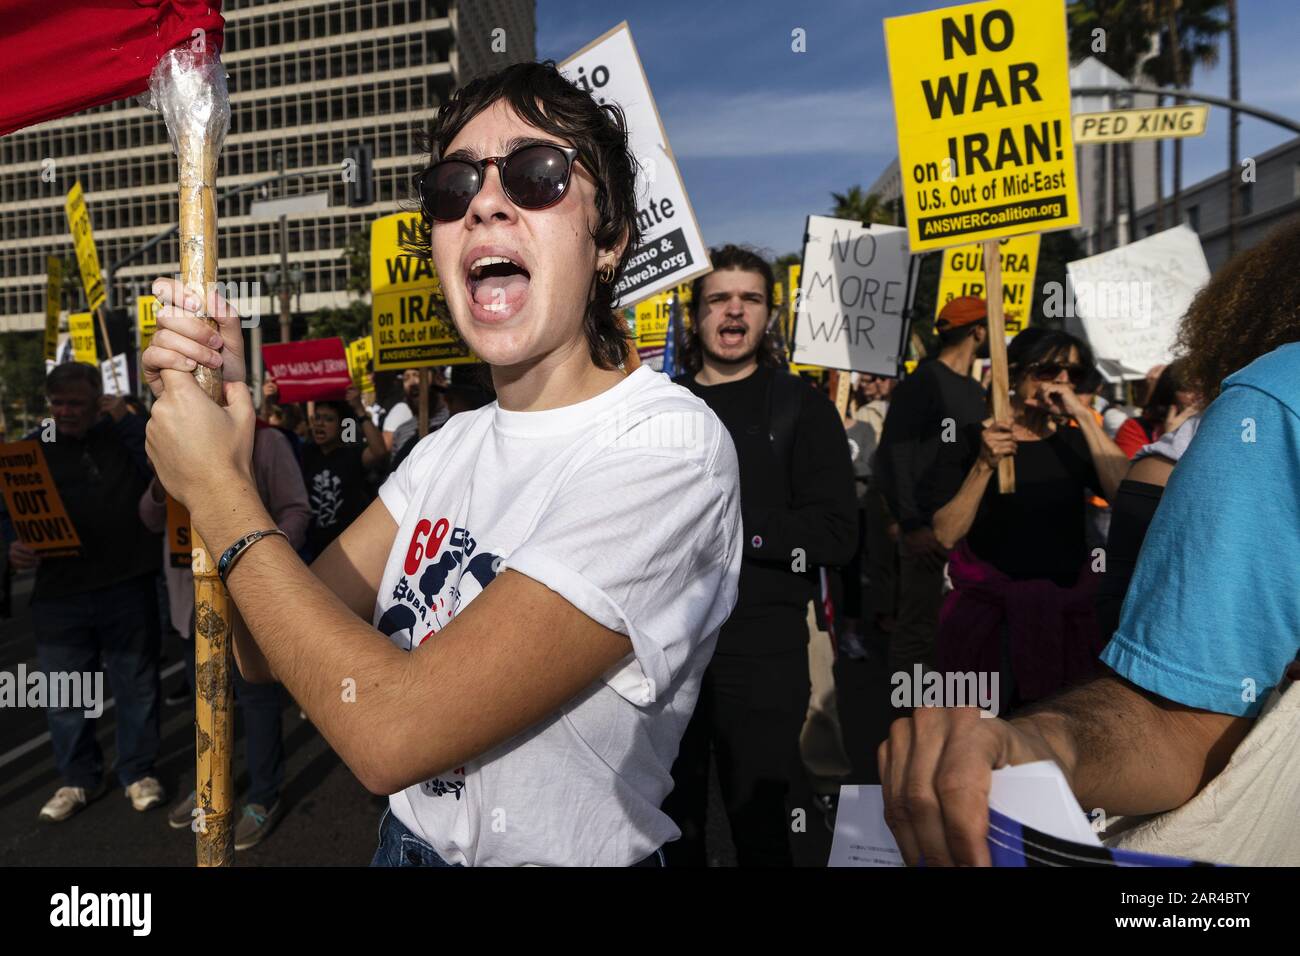 Los Angeles, USA. 15th Mar, 2019. Protesters chants slogans during the demonstration.No War in Iran protest against the Trump Administration's military actions and economic sanctions against Iran. Organizers called on Trump to withdraw U.S. troops from Iraq and not to drag the U.S. into a war in the Middle East. Credit: Ronen Tivony/SOPA Images/ZUMA Wire/Alamy Live News Stock Photo